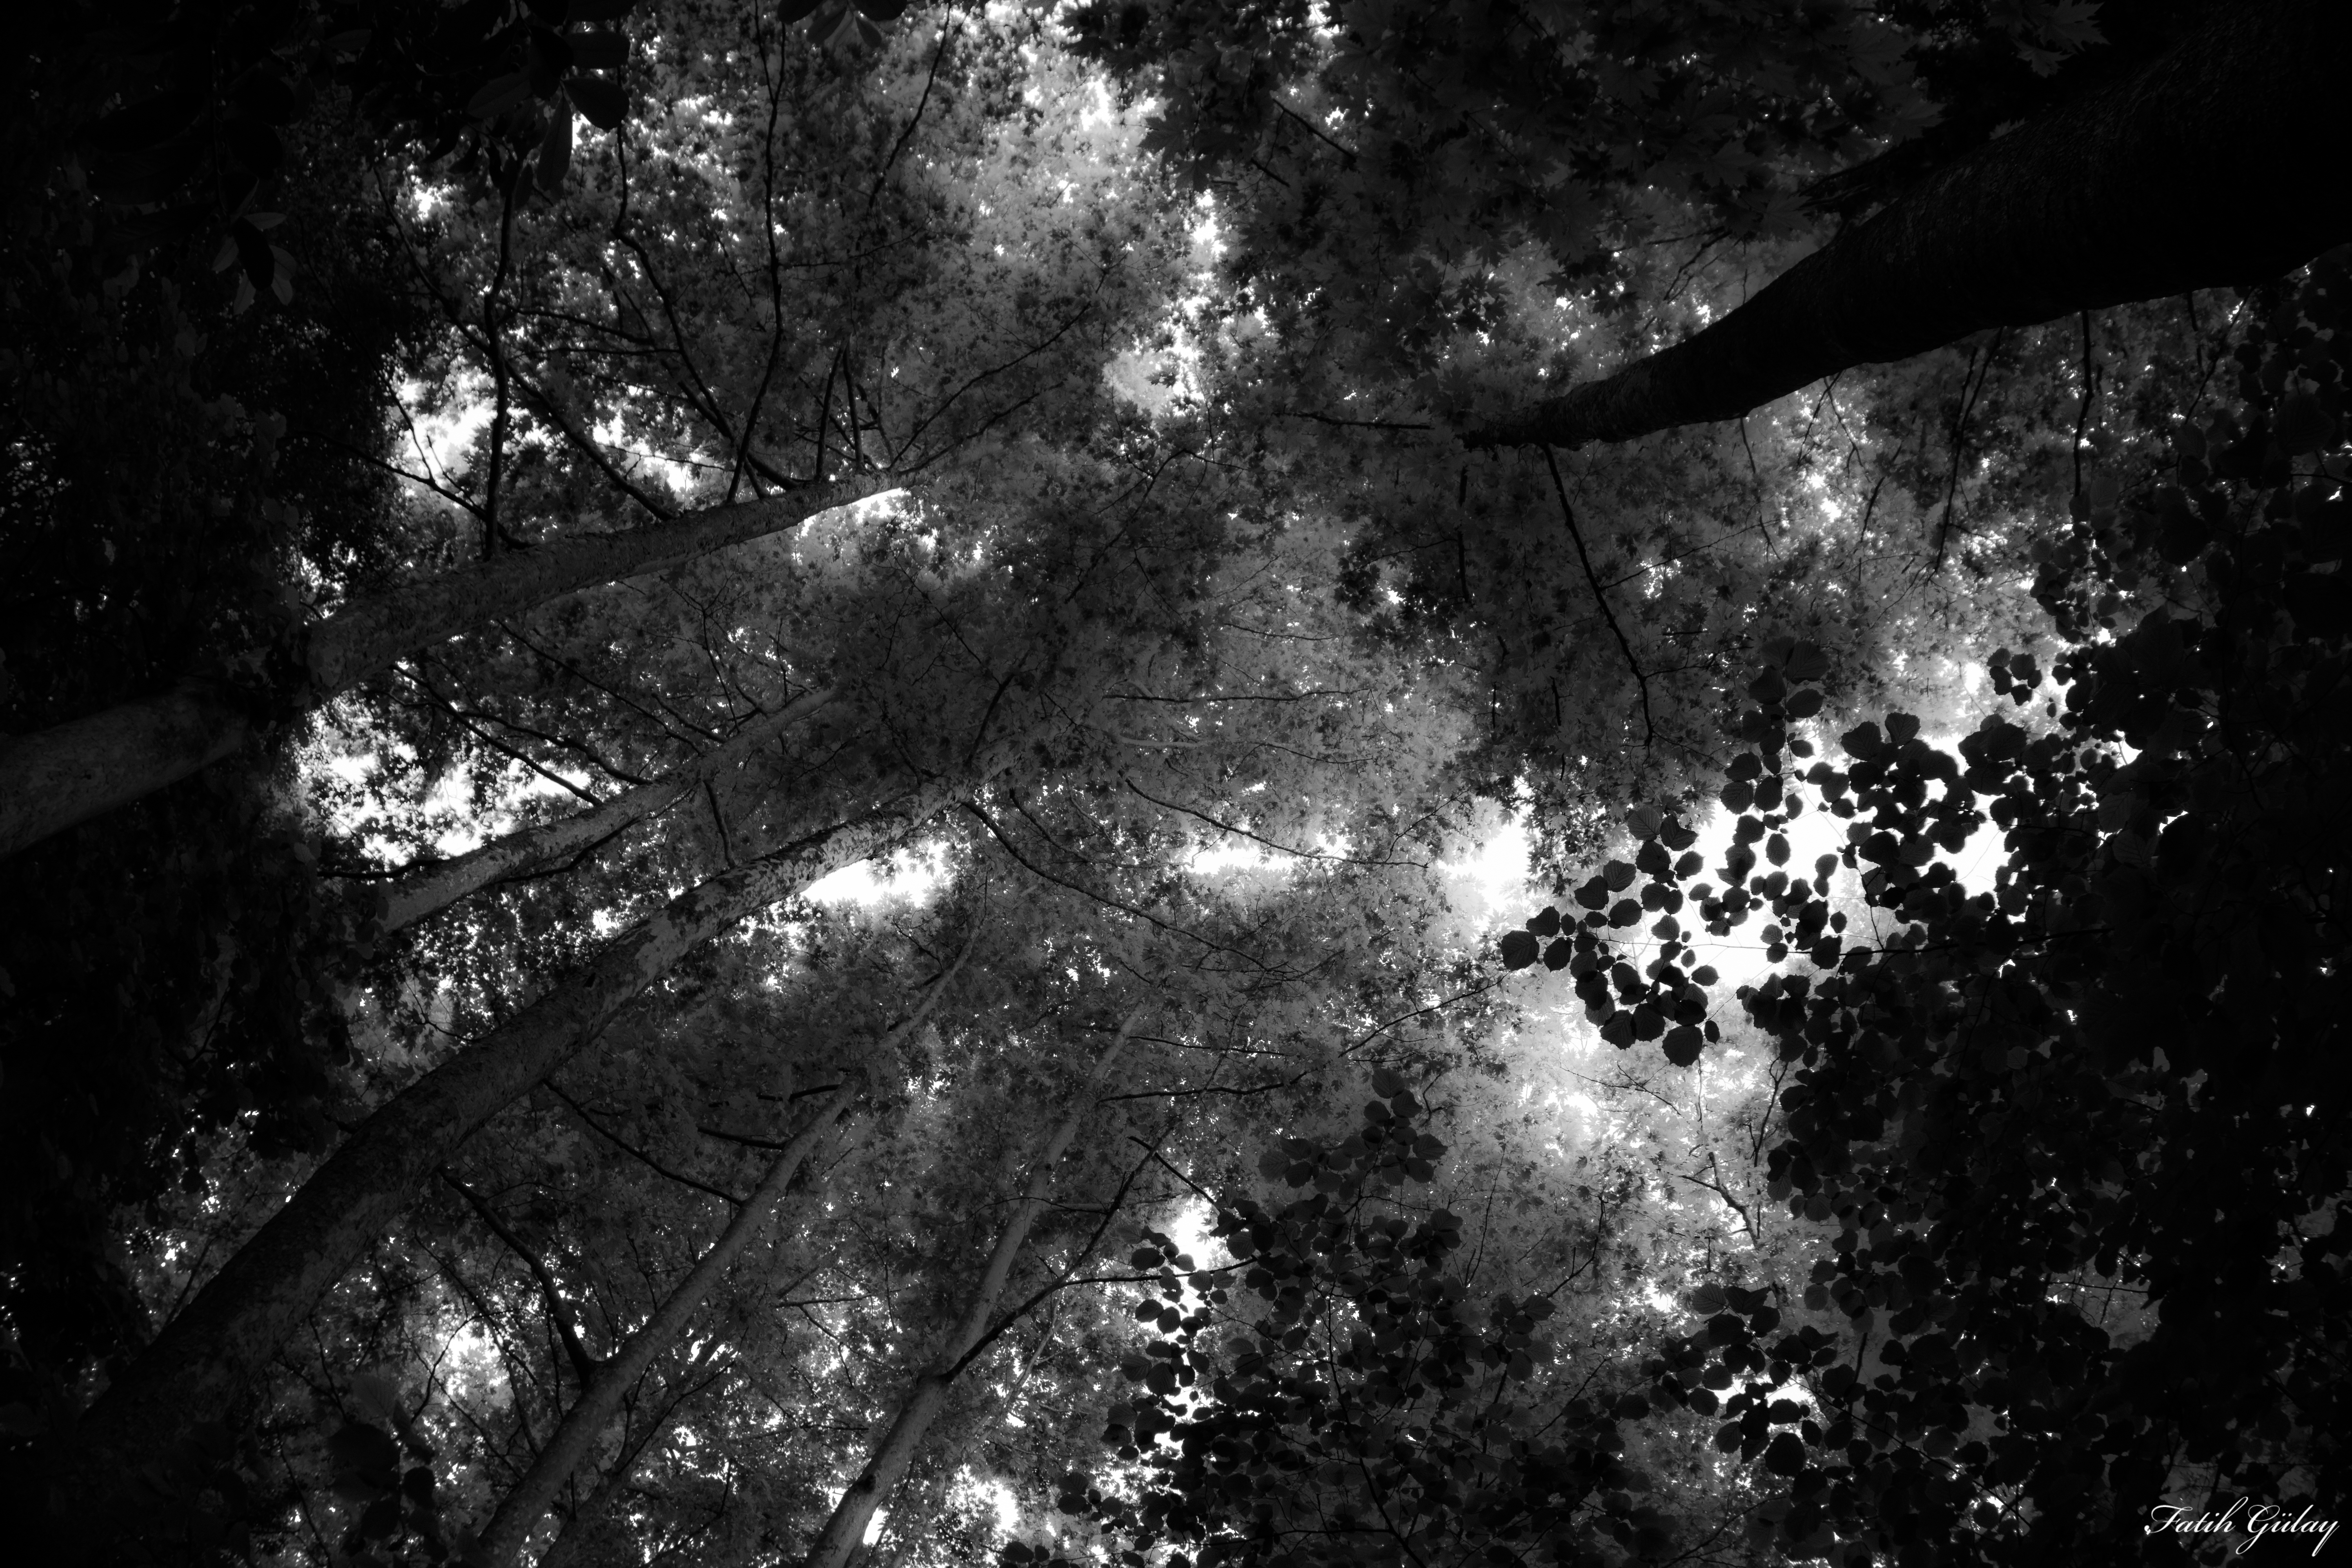 General 6000x4000 monochrome nature black white forest trees